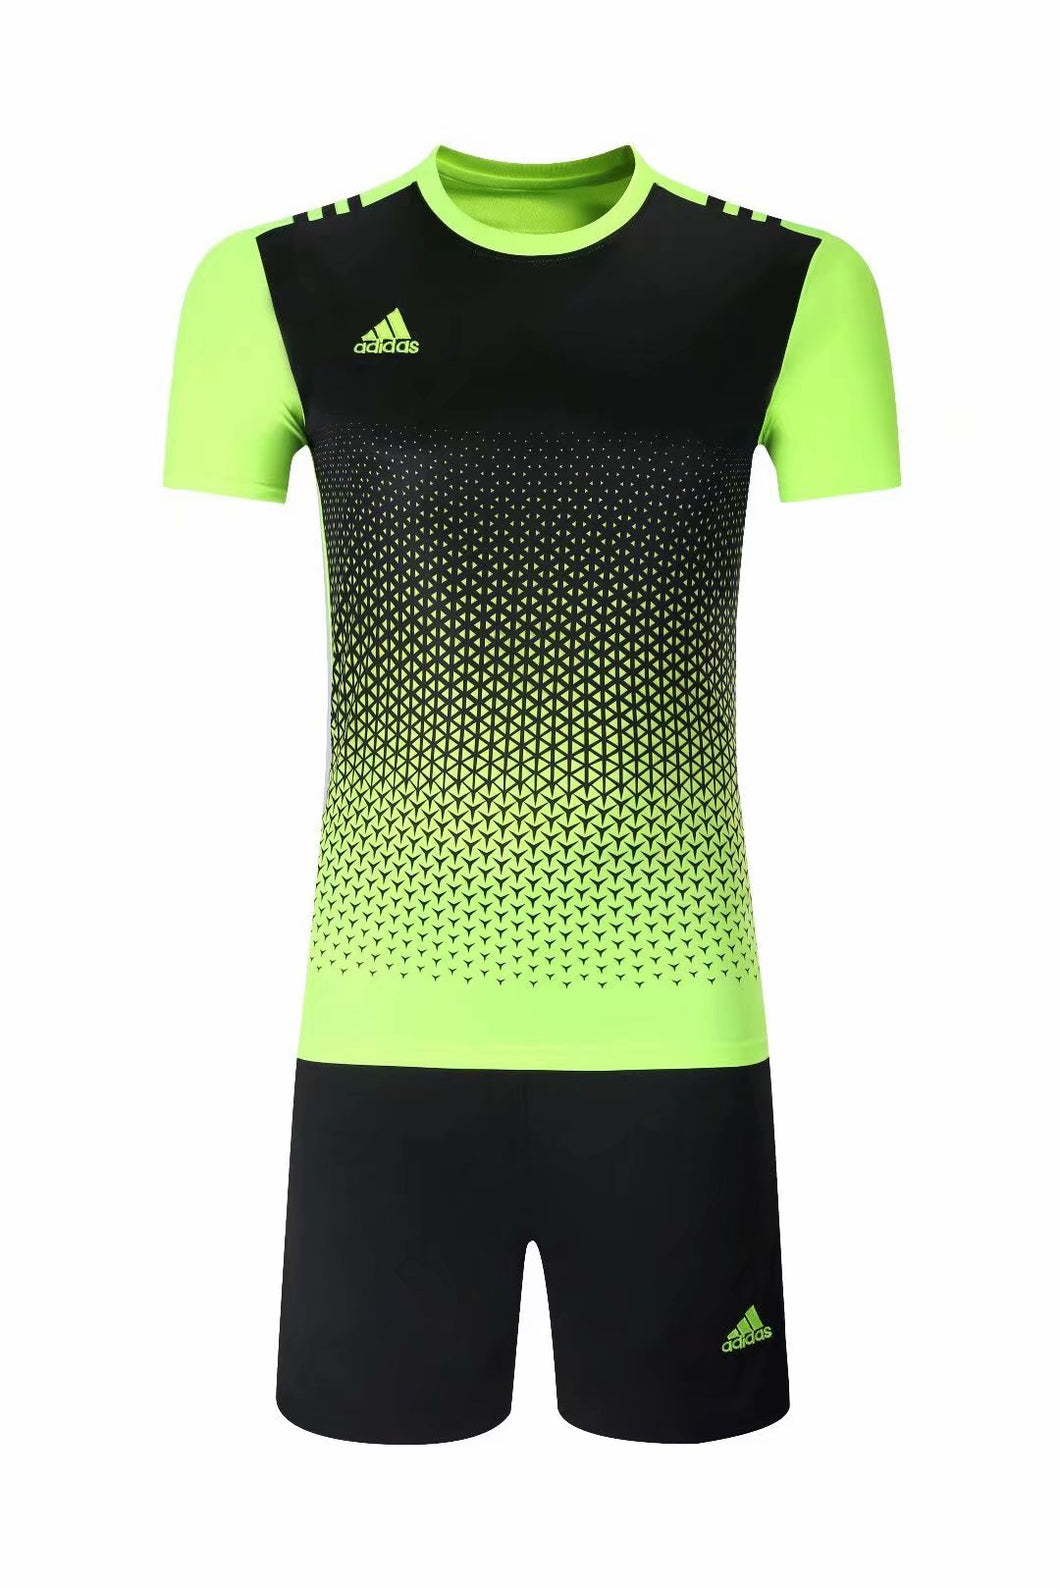 black and lime green adidas